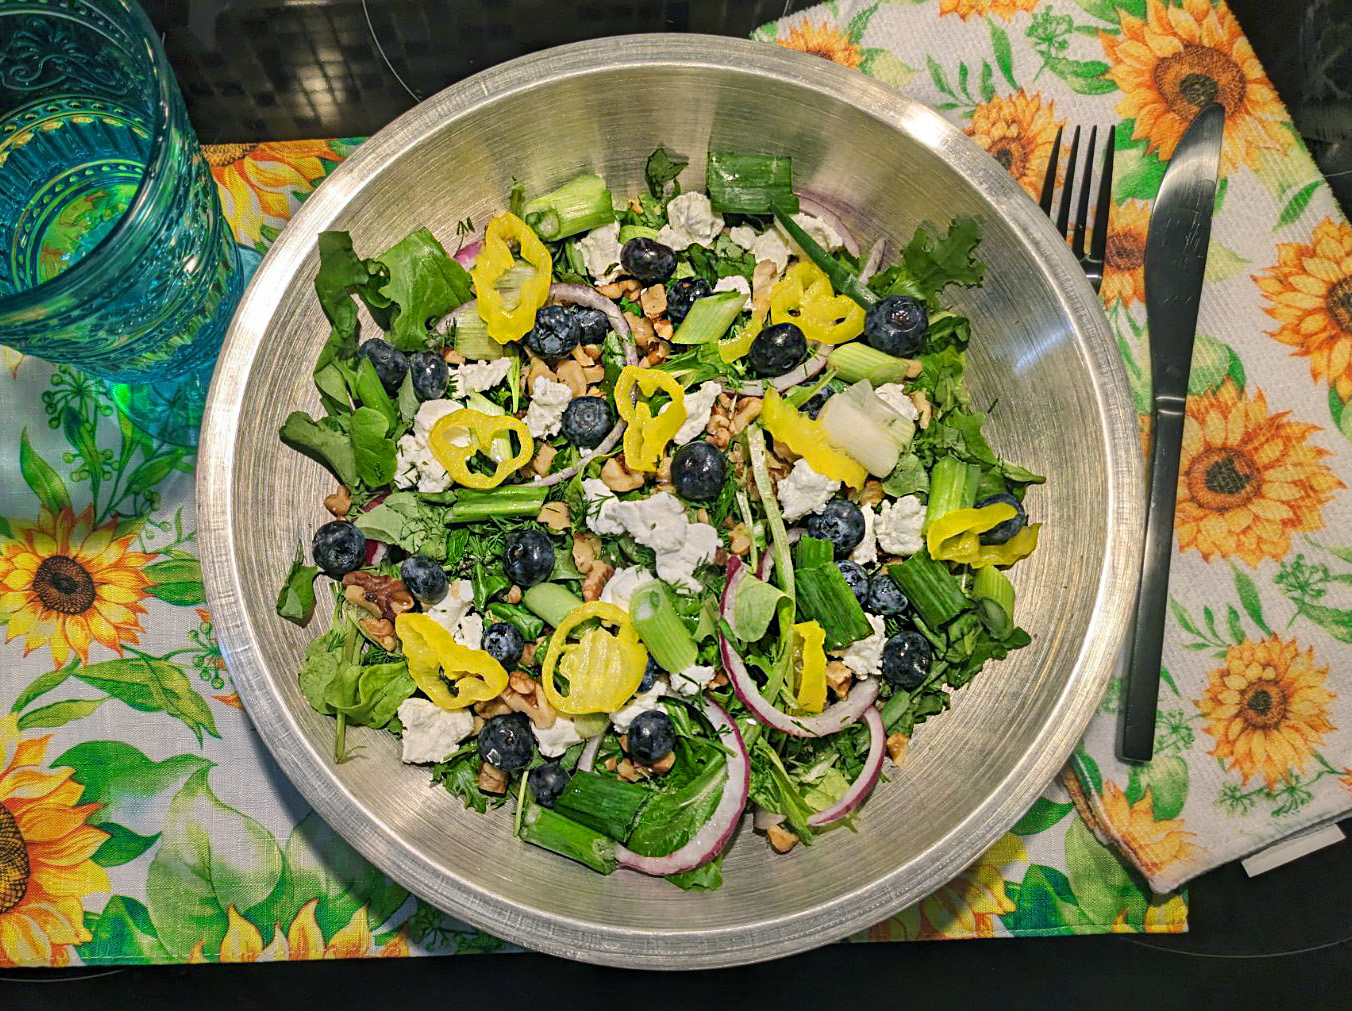 Salad in a bowl with mixed greens, red onions, banana peppers, and blueberries.